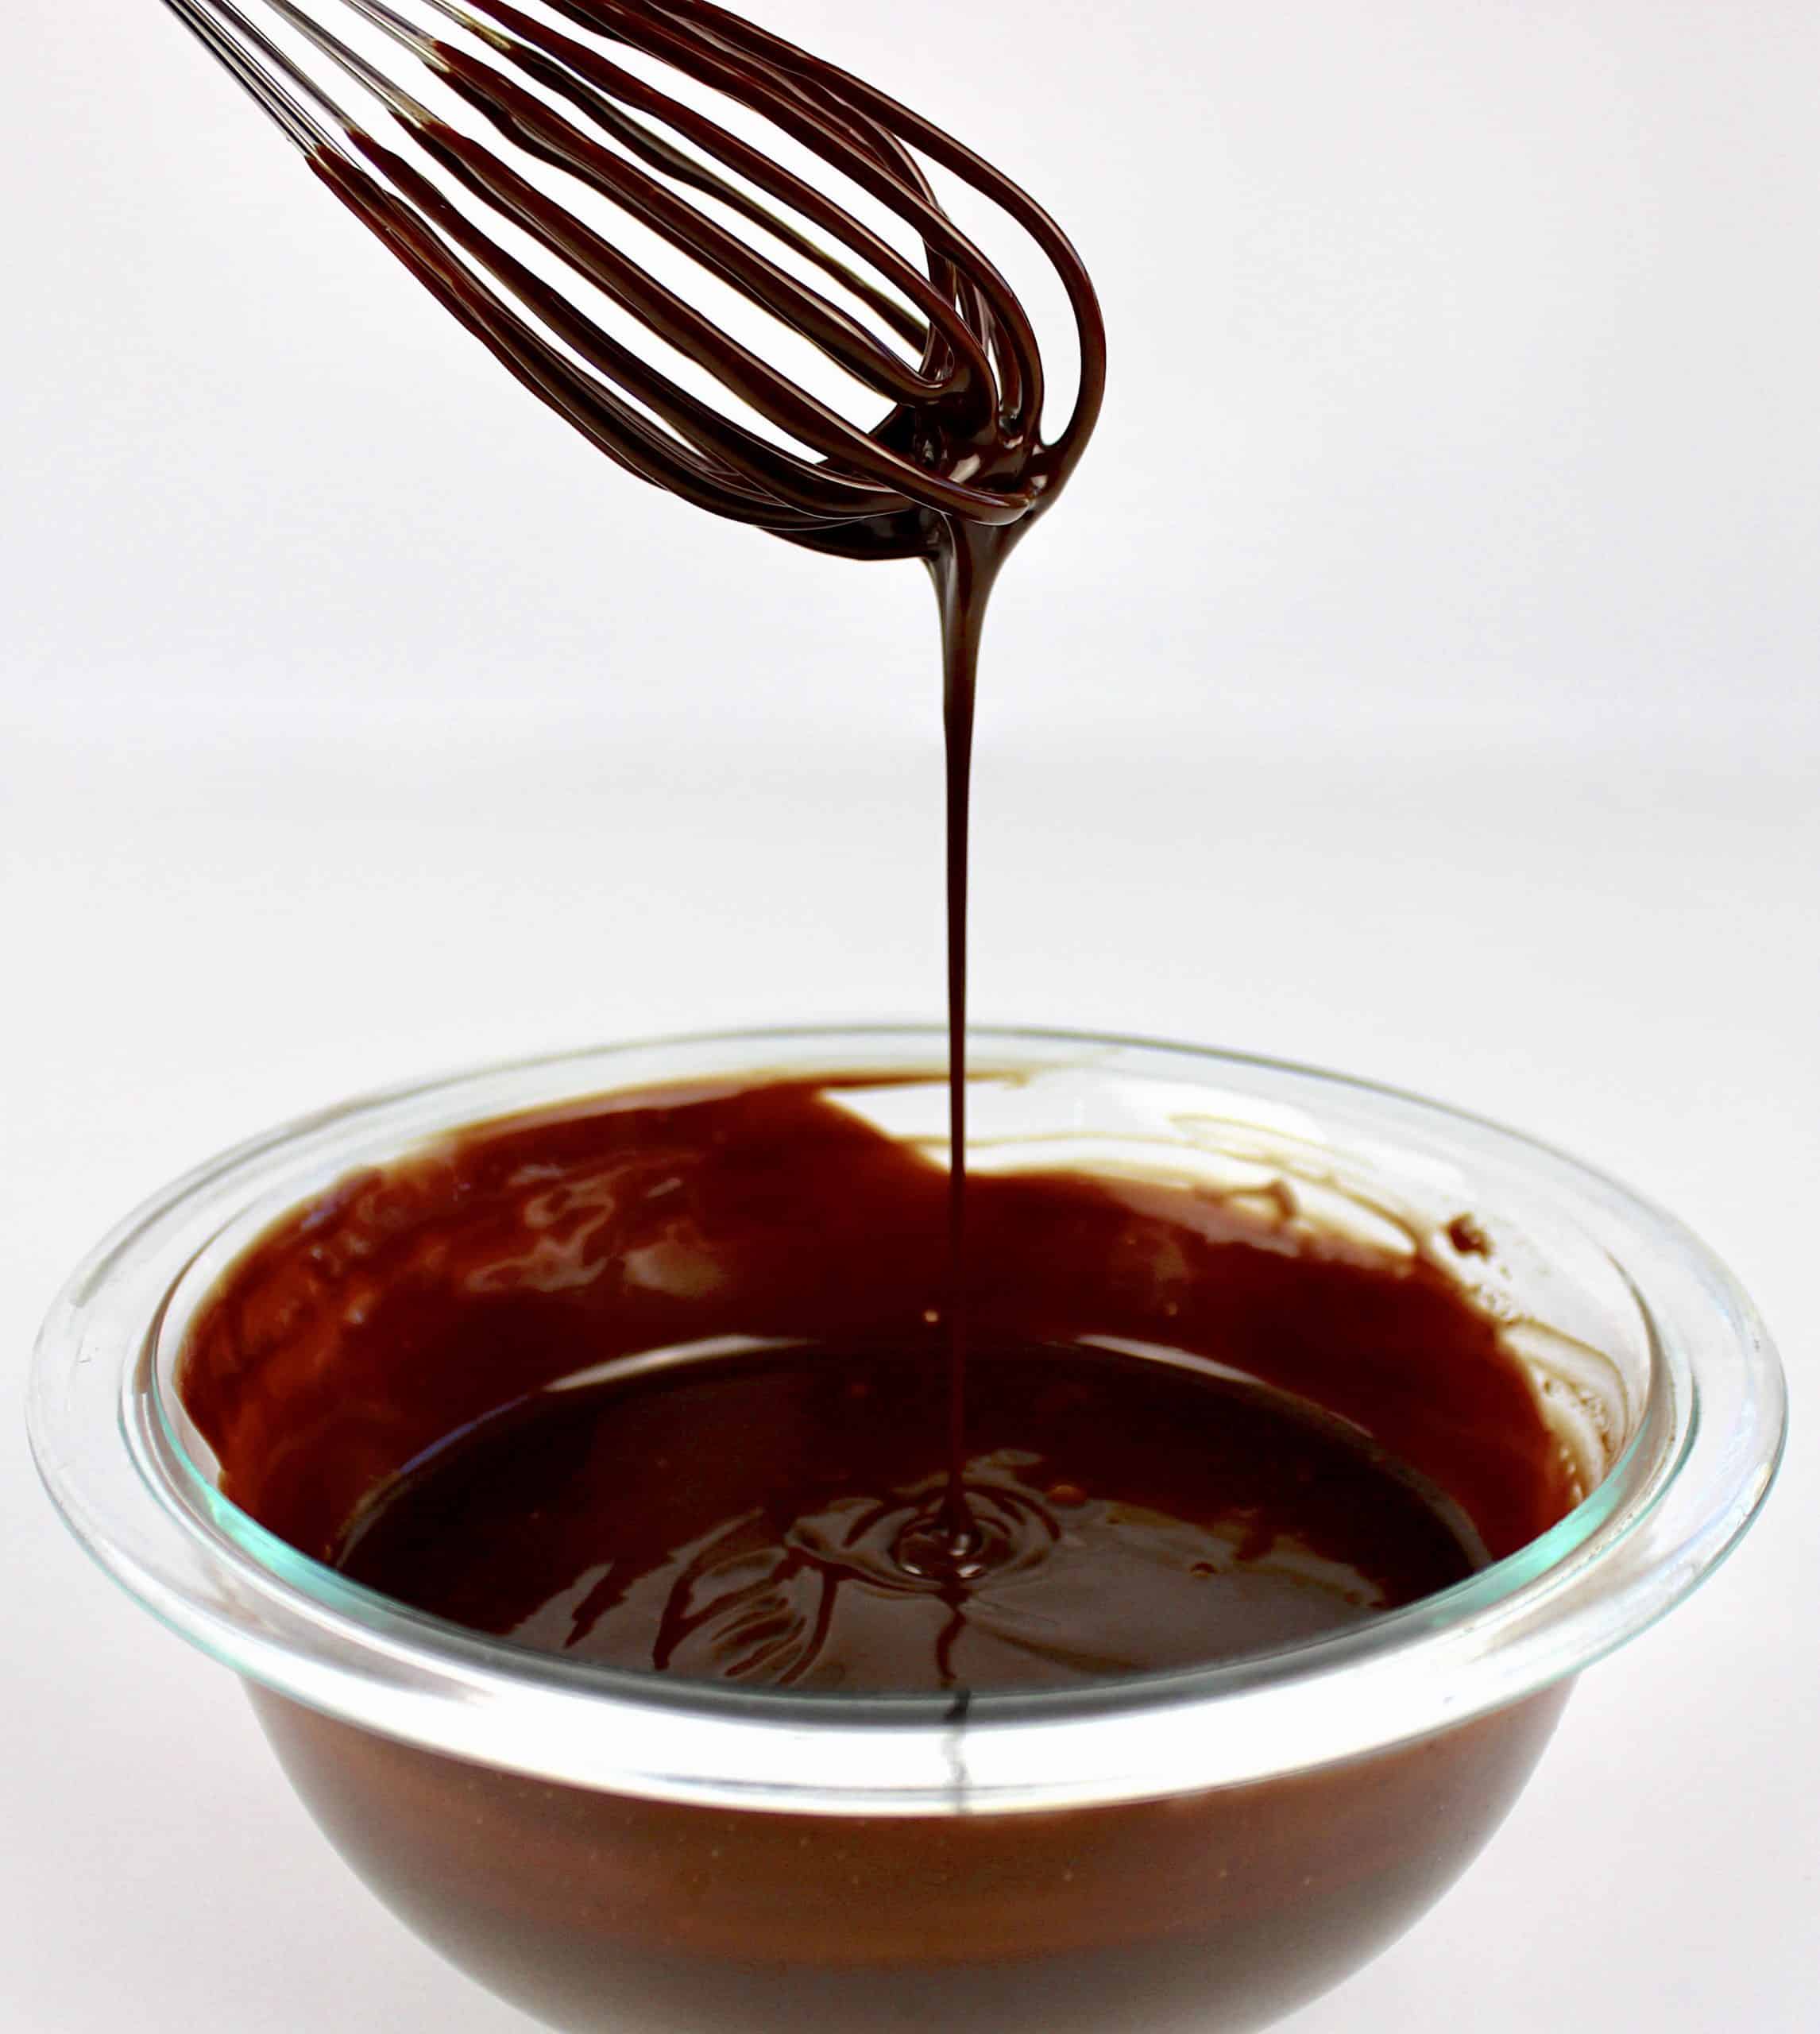 chocolate sauce in glass bowl being dripped from whisk